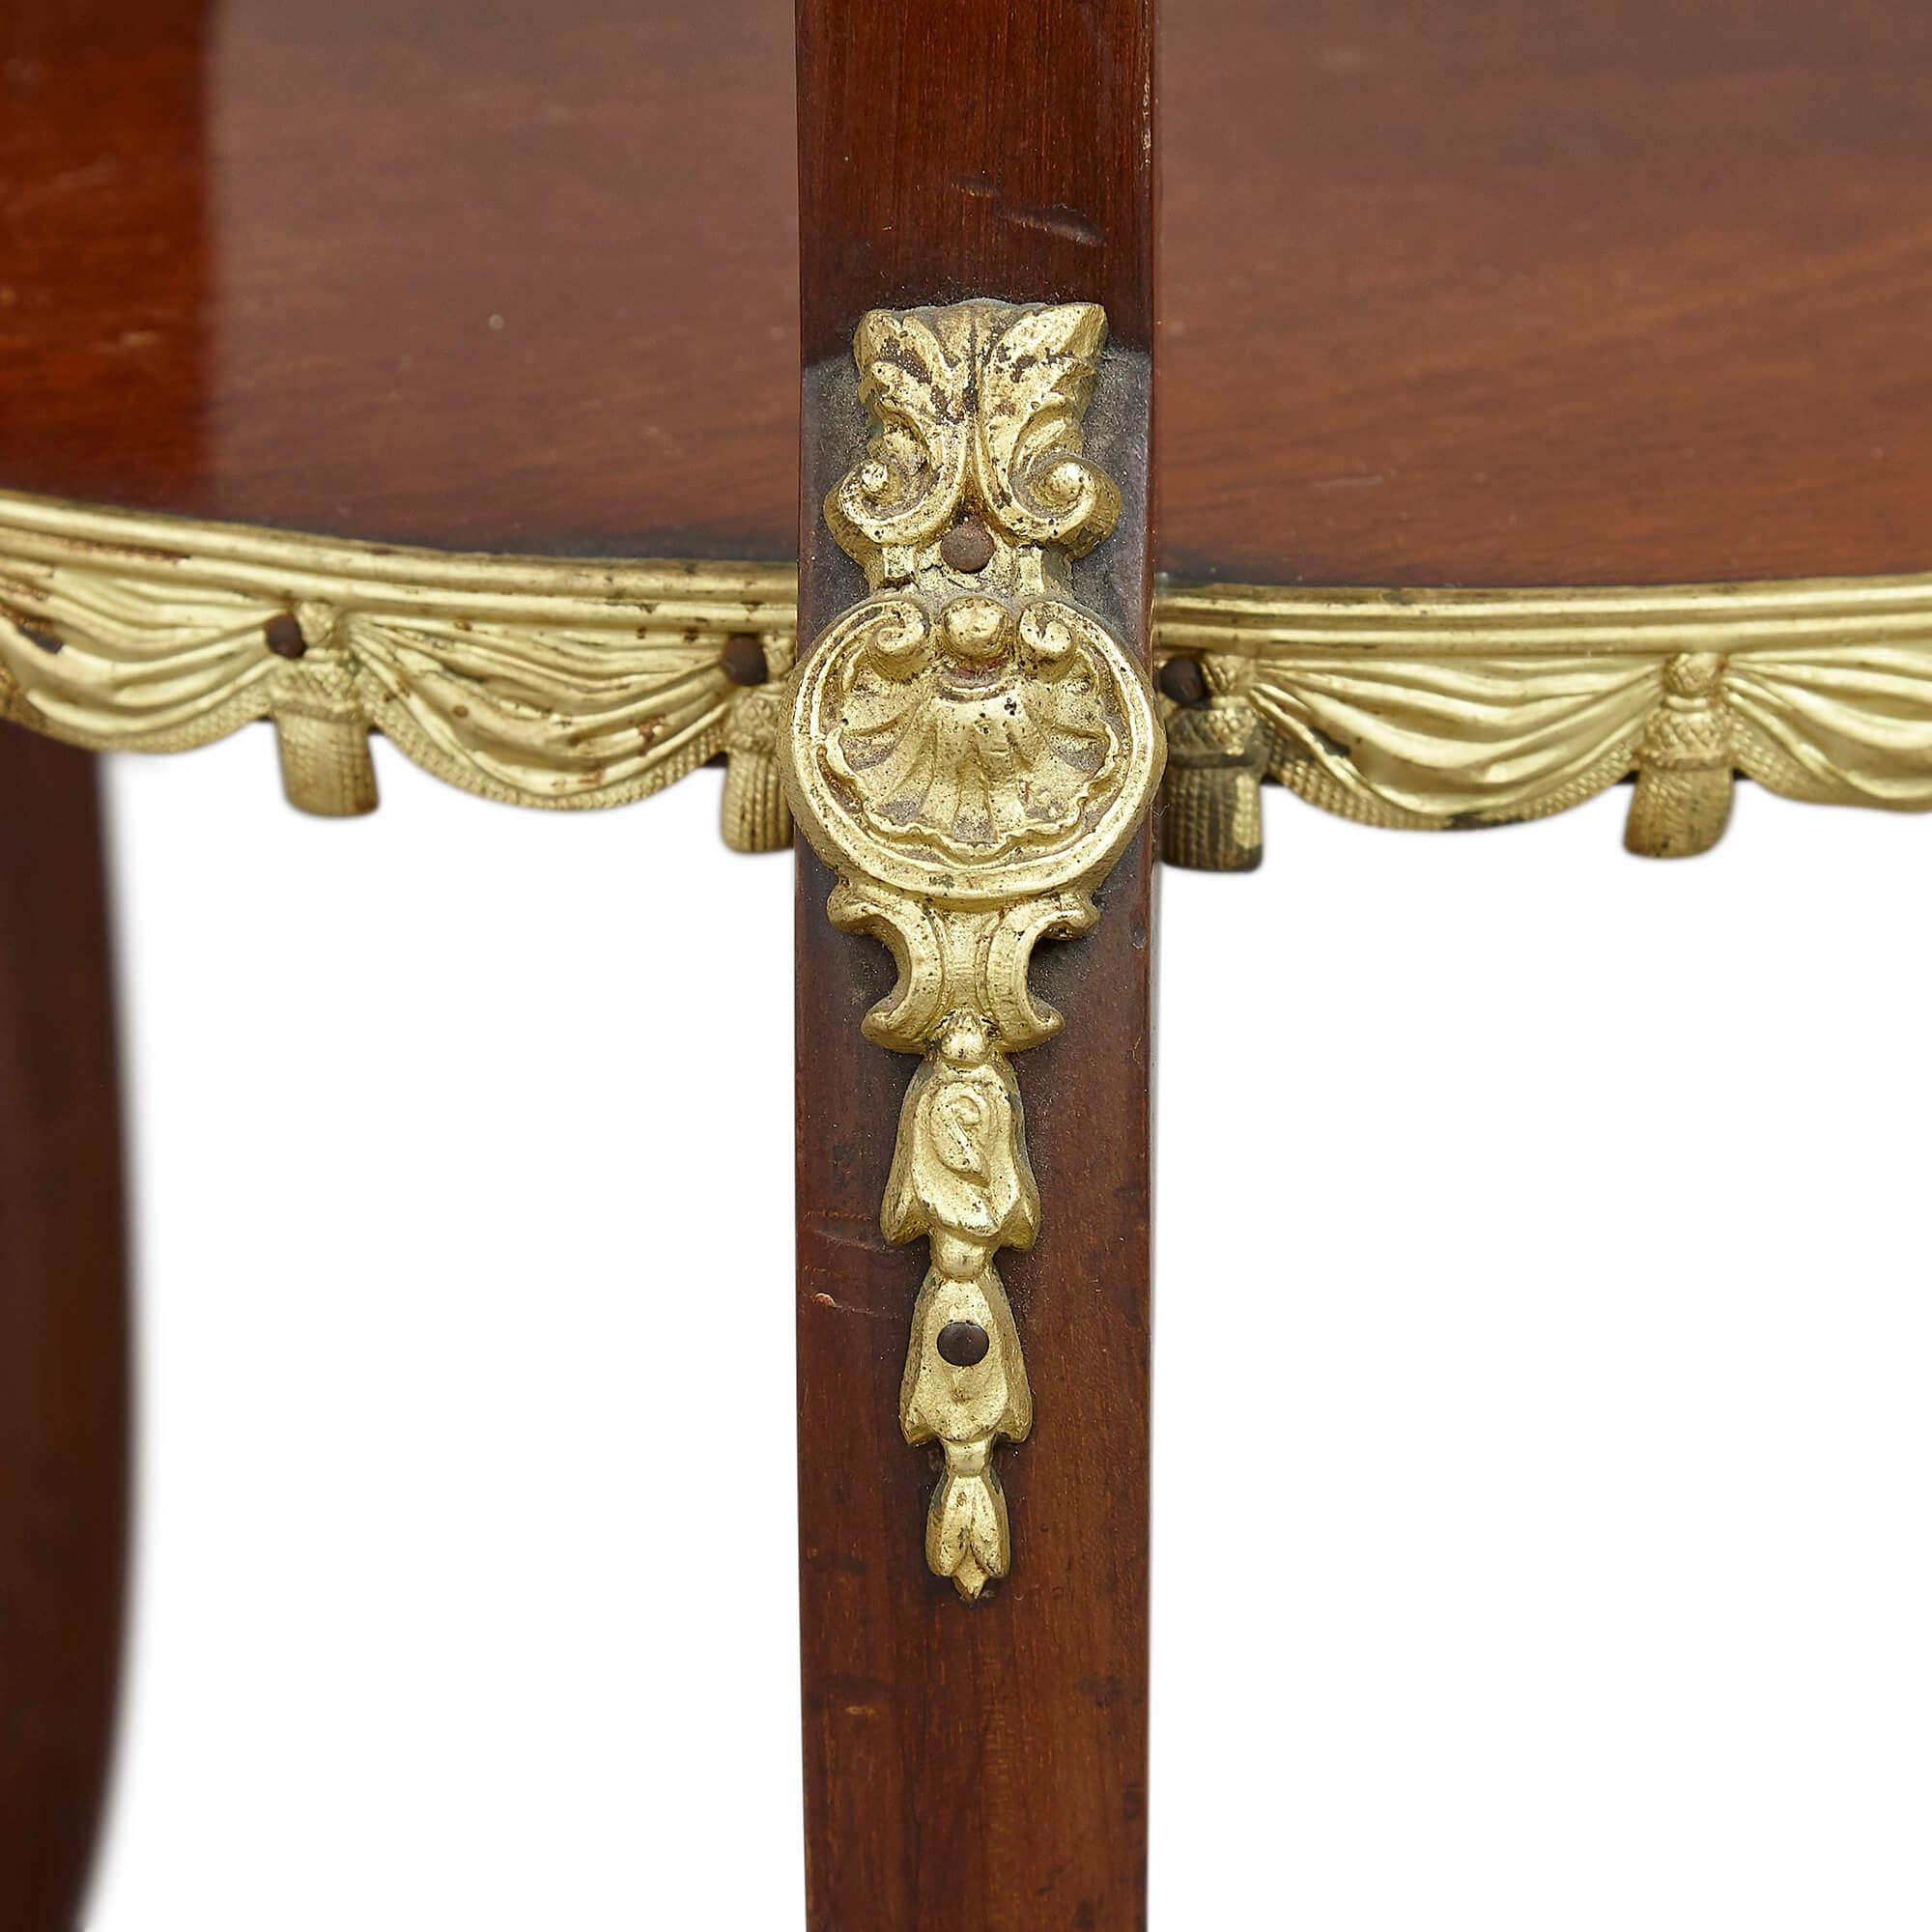 19th Century French Transitional Style Ormolu Mounted Wood Étagère For Sale